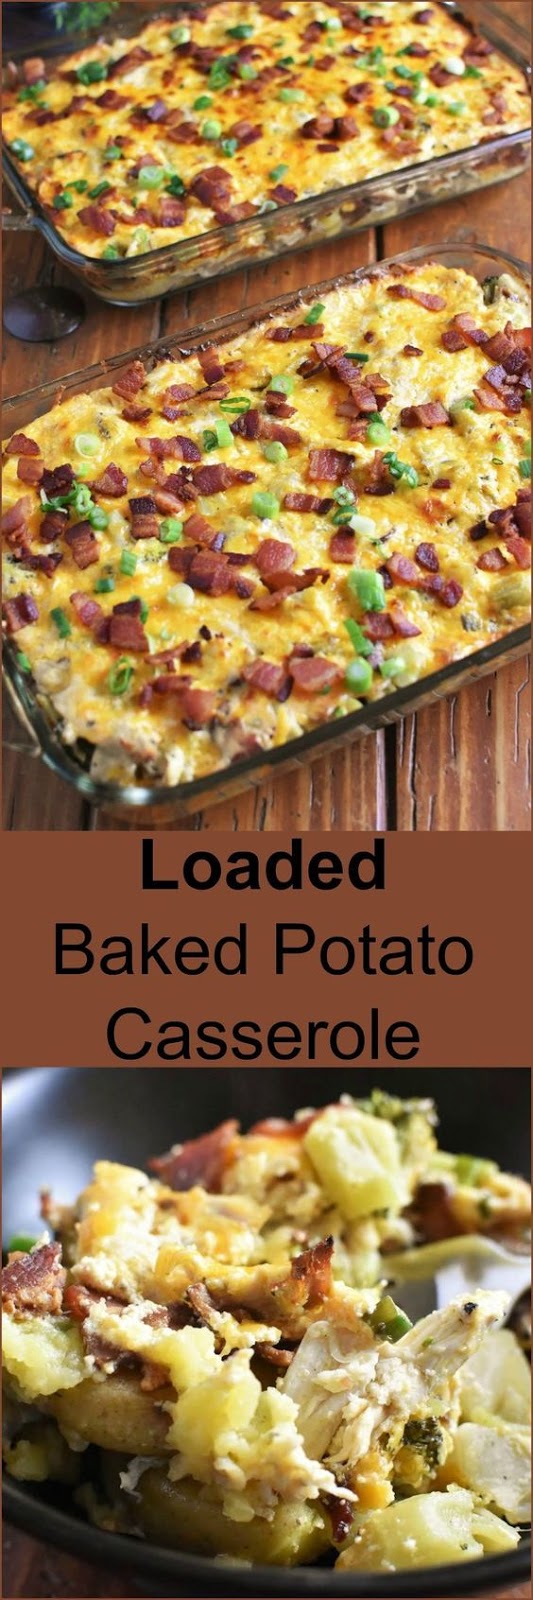 Loaded Baked Potato Casserole full of cheesy, gooey, bacon-y, chicken-y wholesome goodness can be on your table and feed a crowd in 45 minutes!